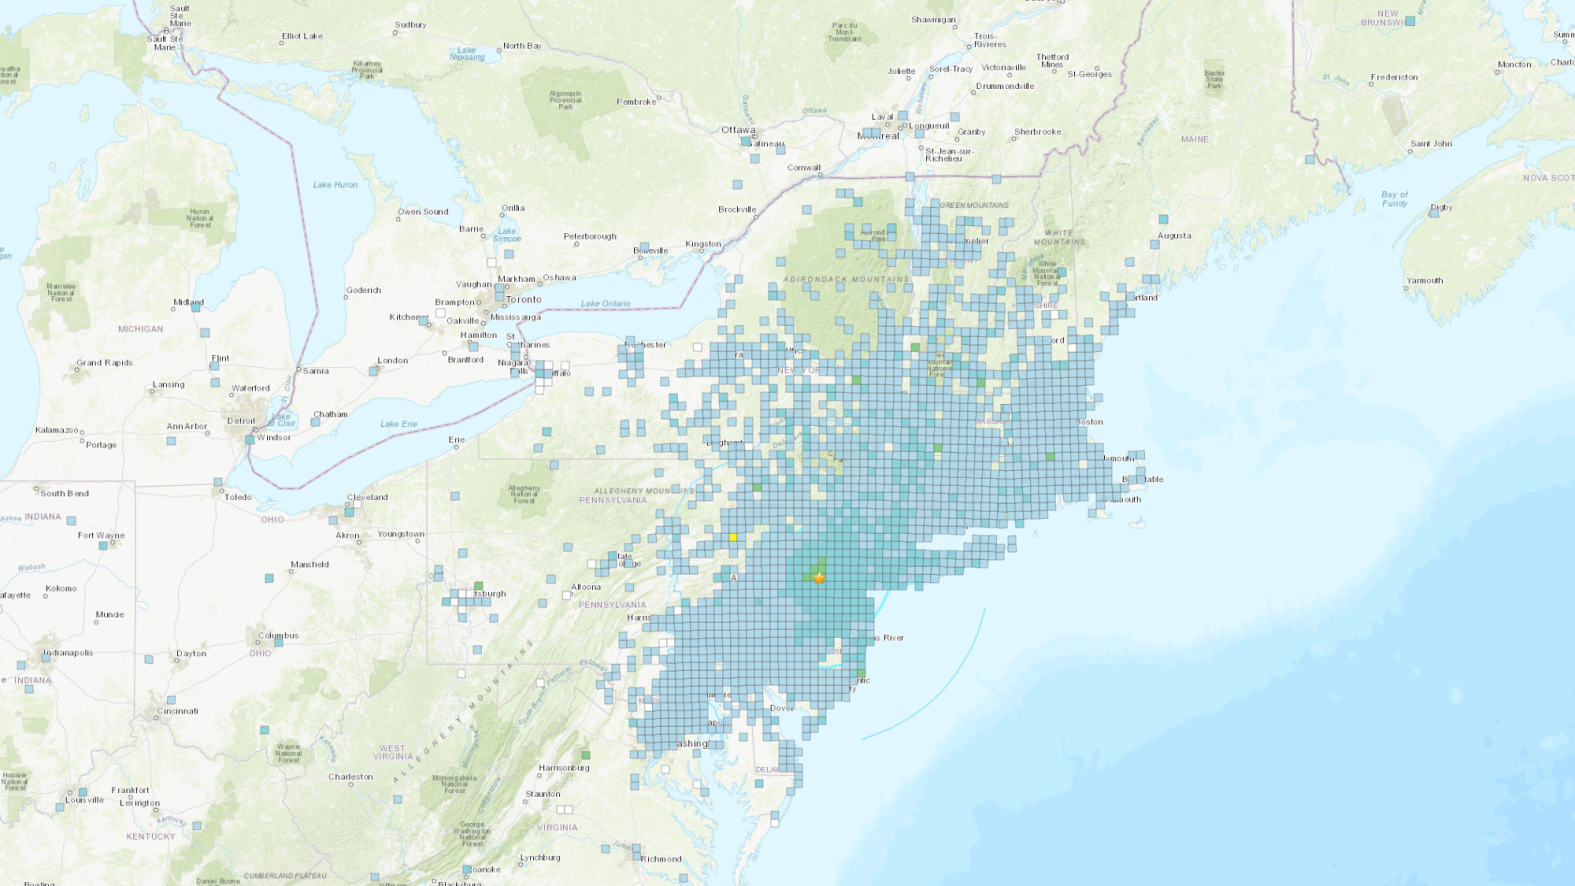 Earthquake in MA? Details on Friday shaking NBC Boston